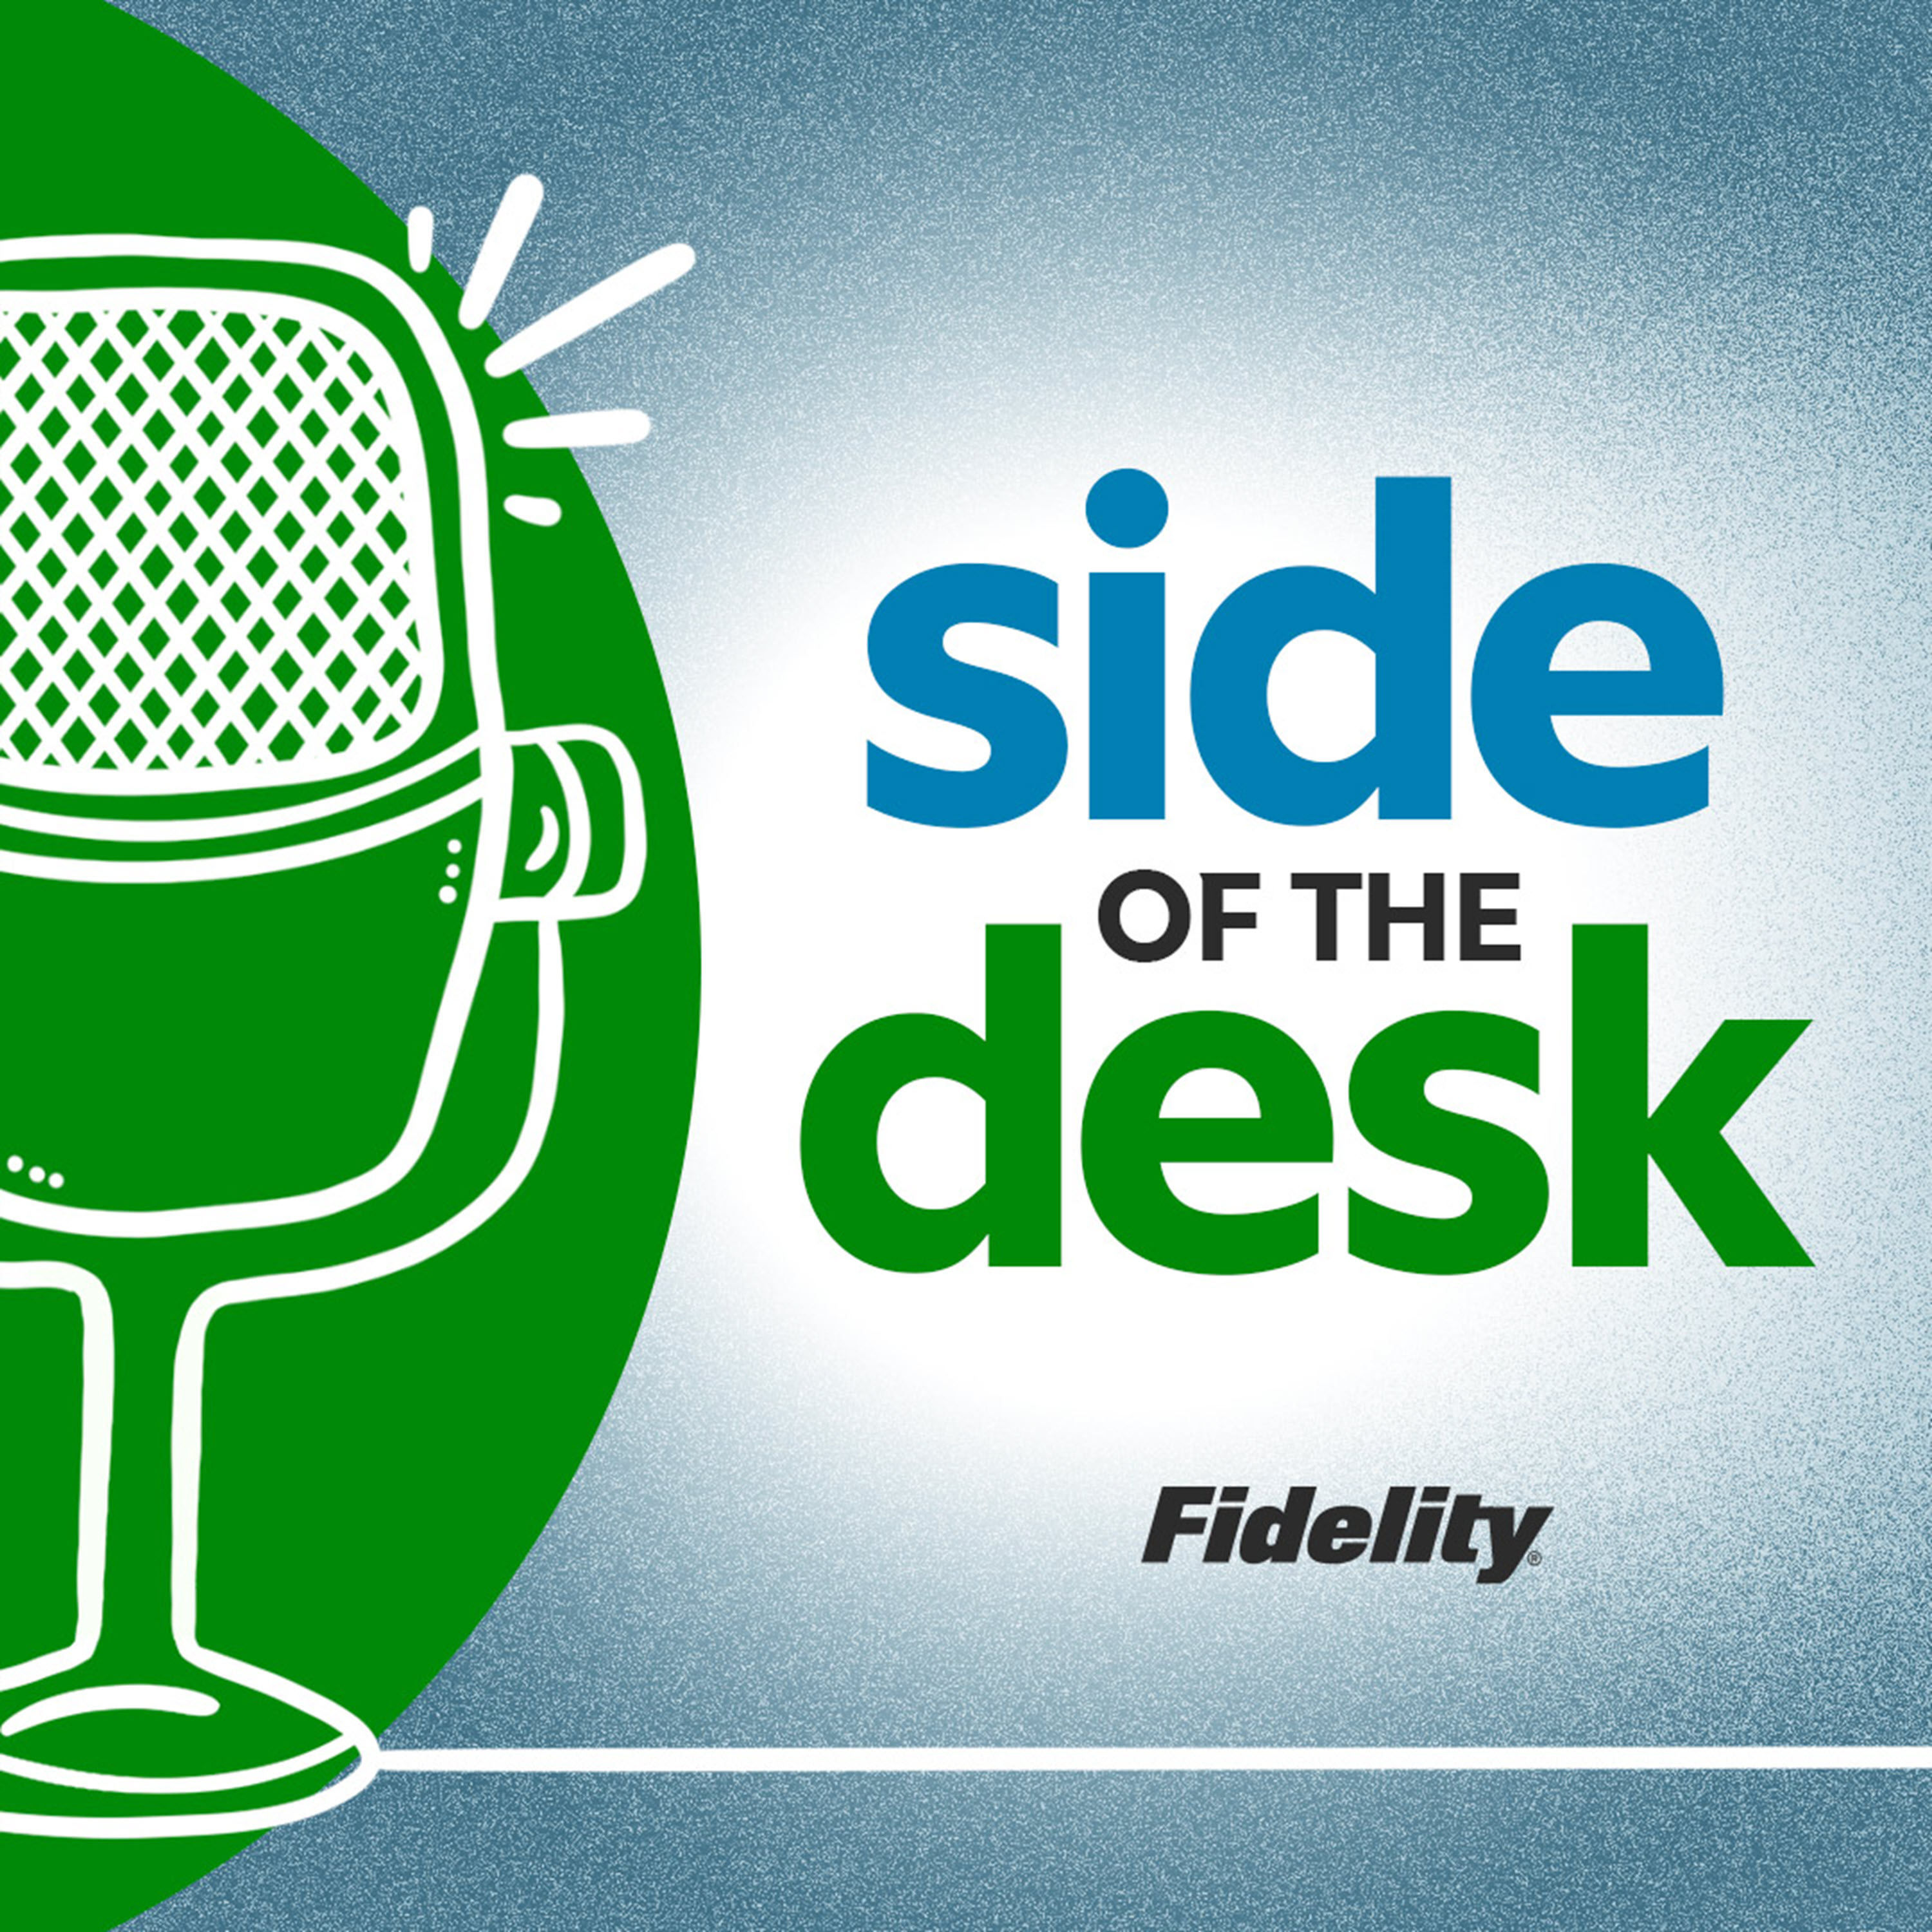 Talking All Things Podcasts at Fidelity